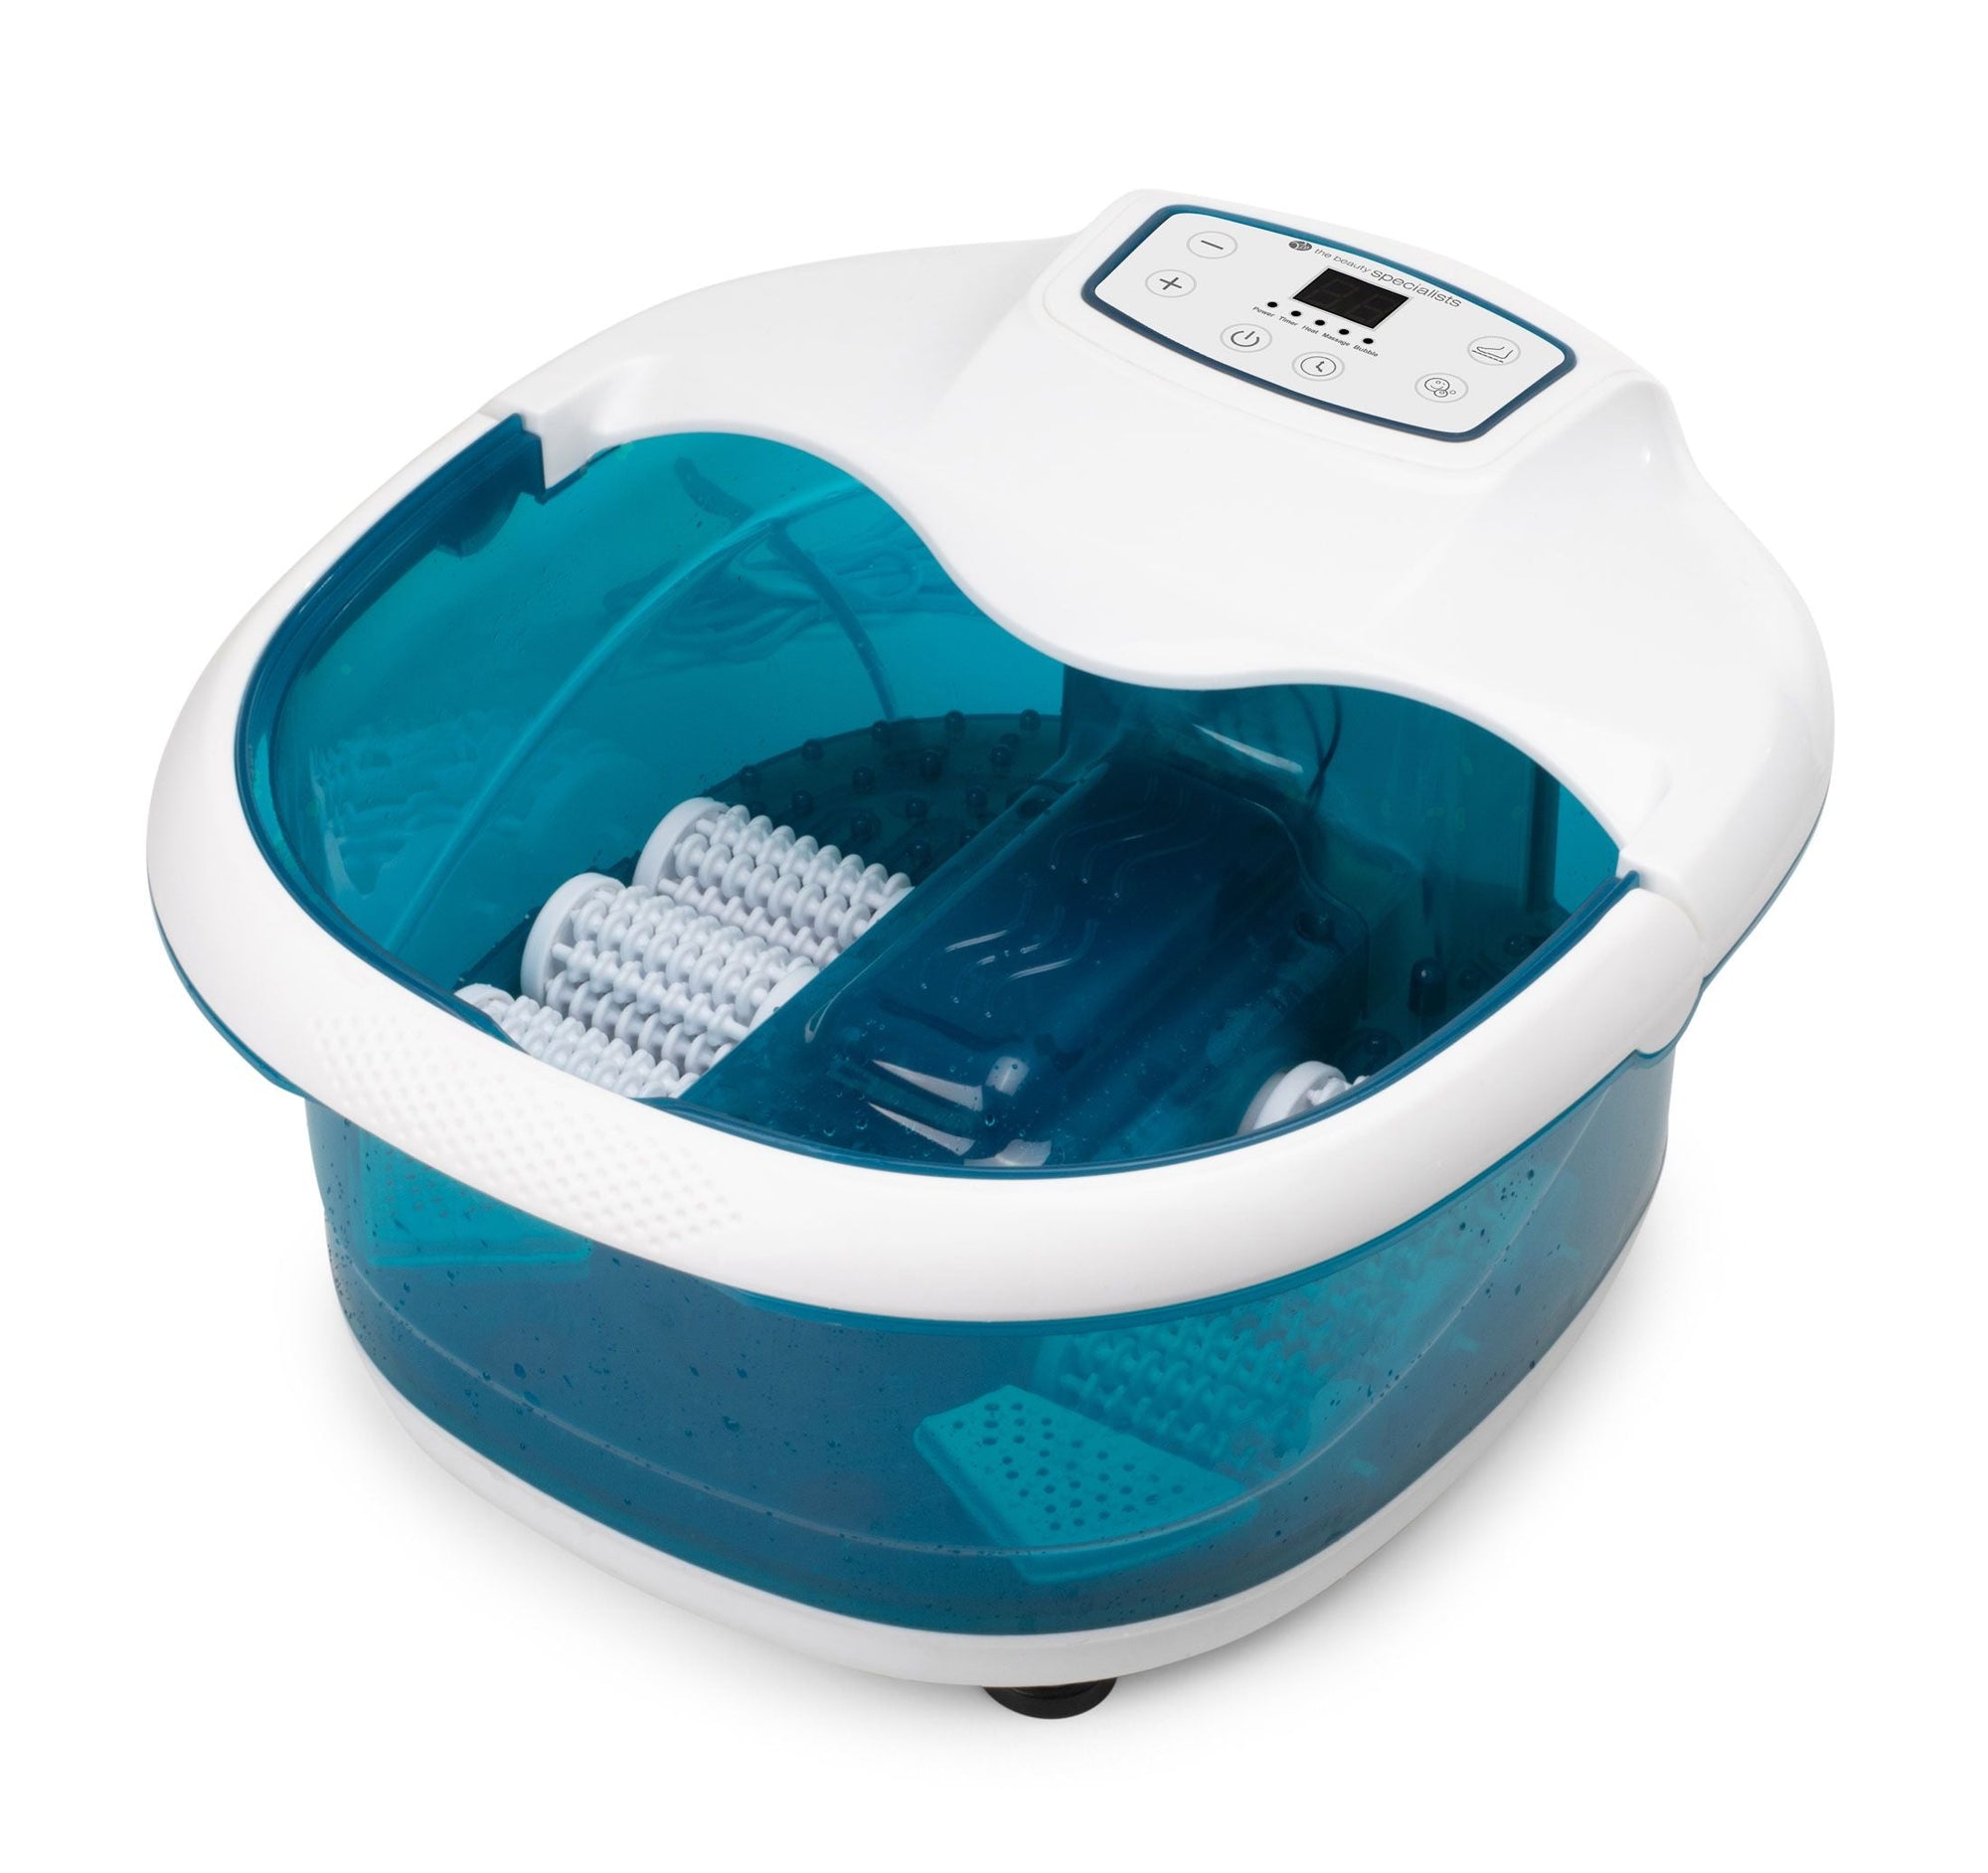 motorised roller foot spa bath without water inside with feet rollers visible 